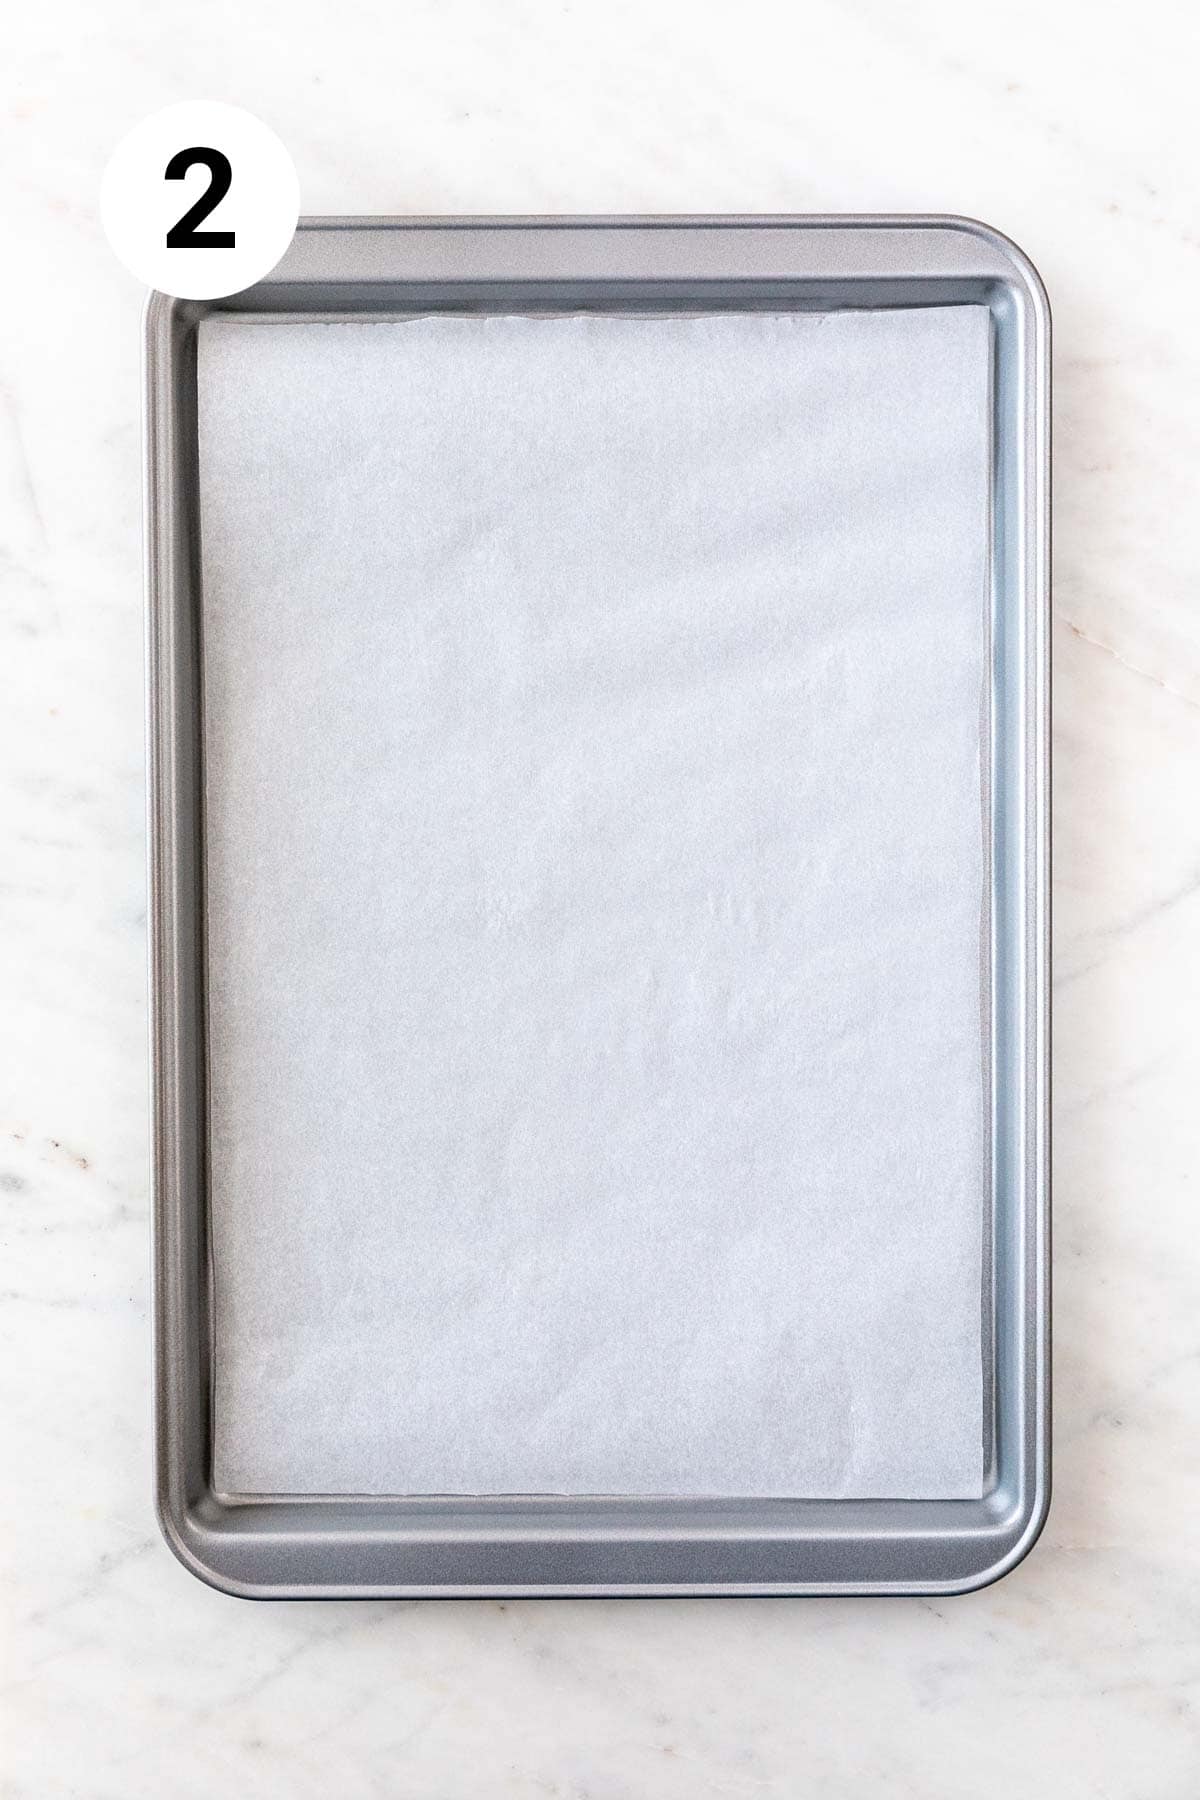 A baking sheet lined with parchment paper.